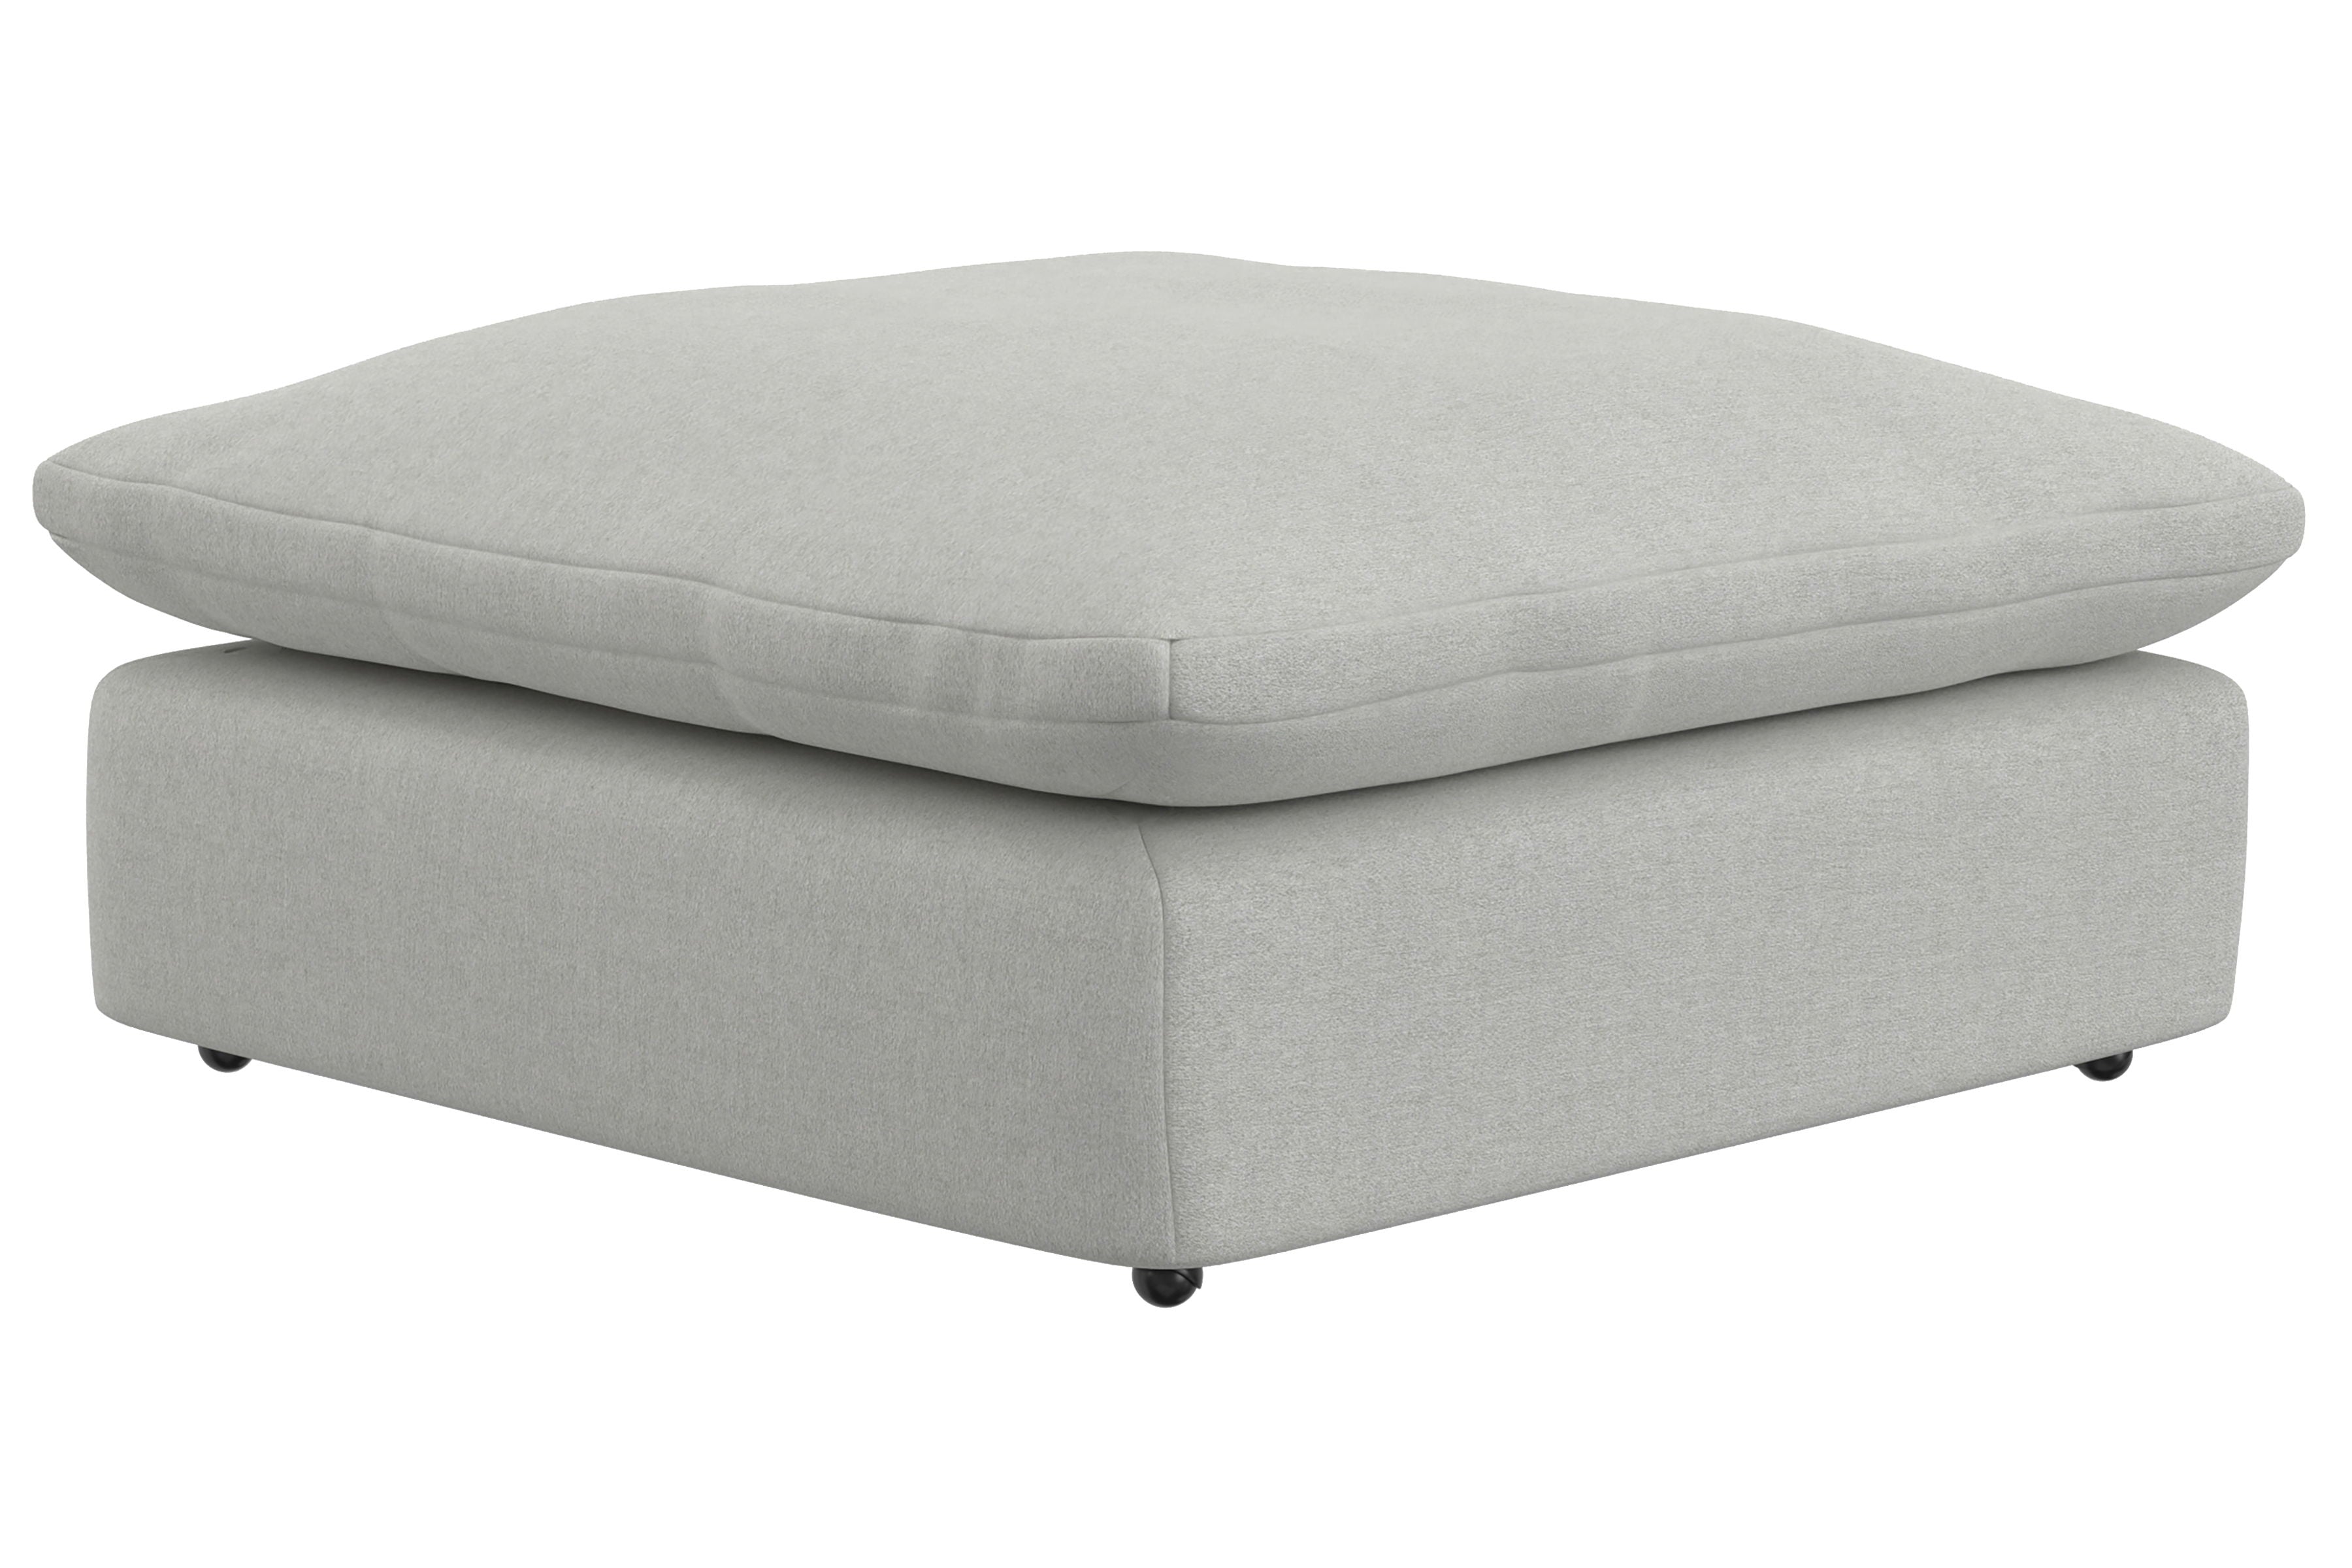 Stratus - Castered Cocktail Ottoman - Cement